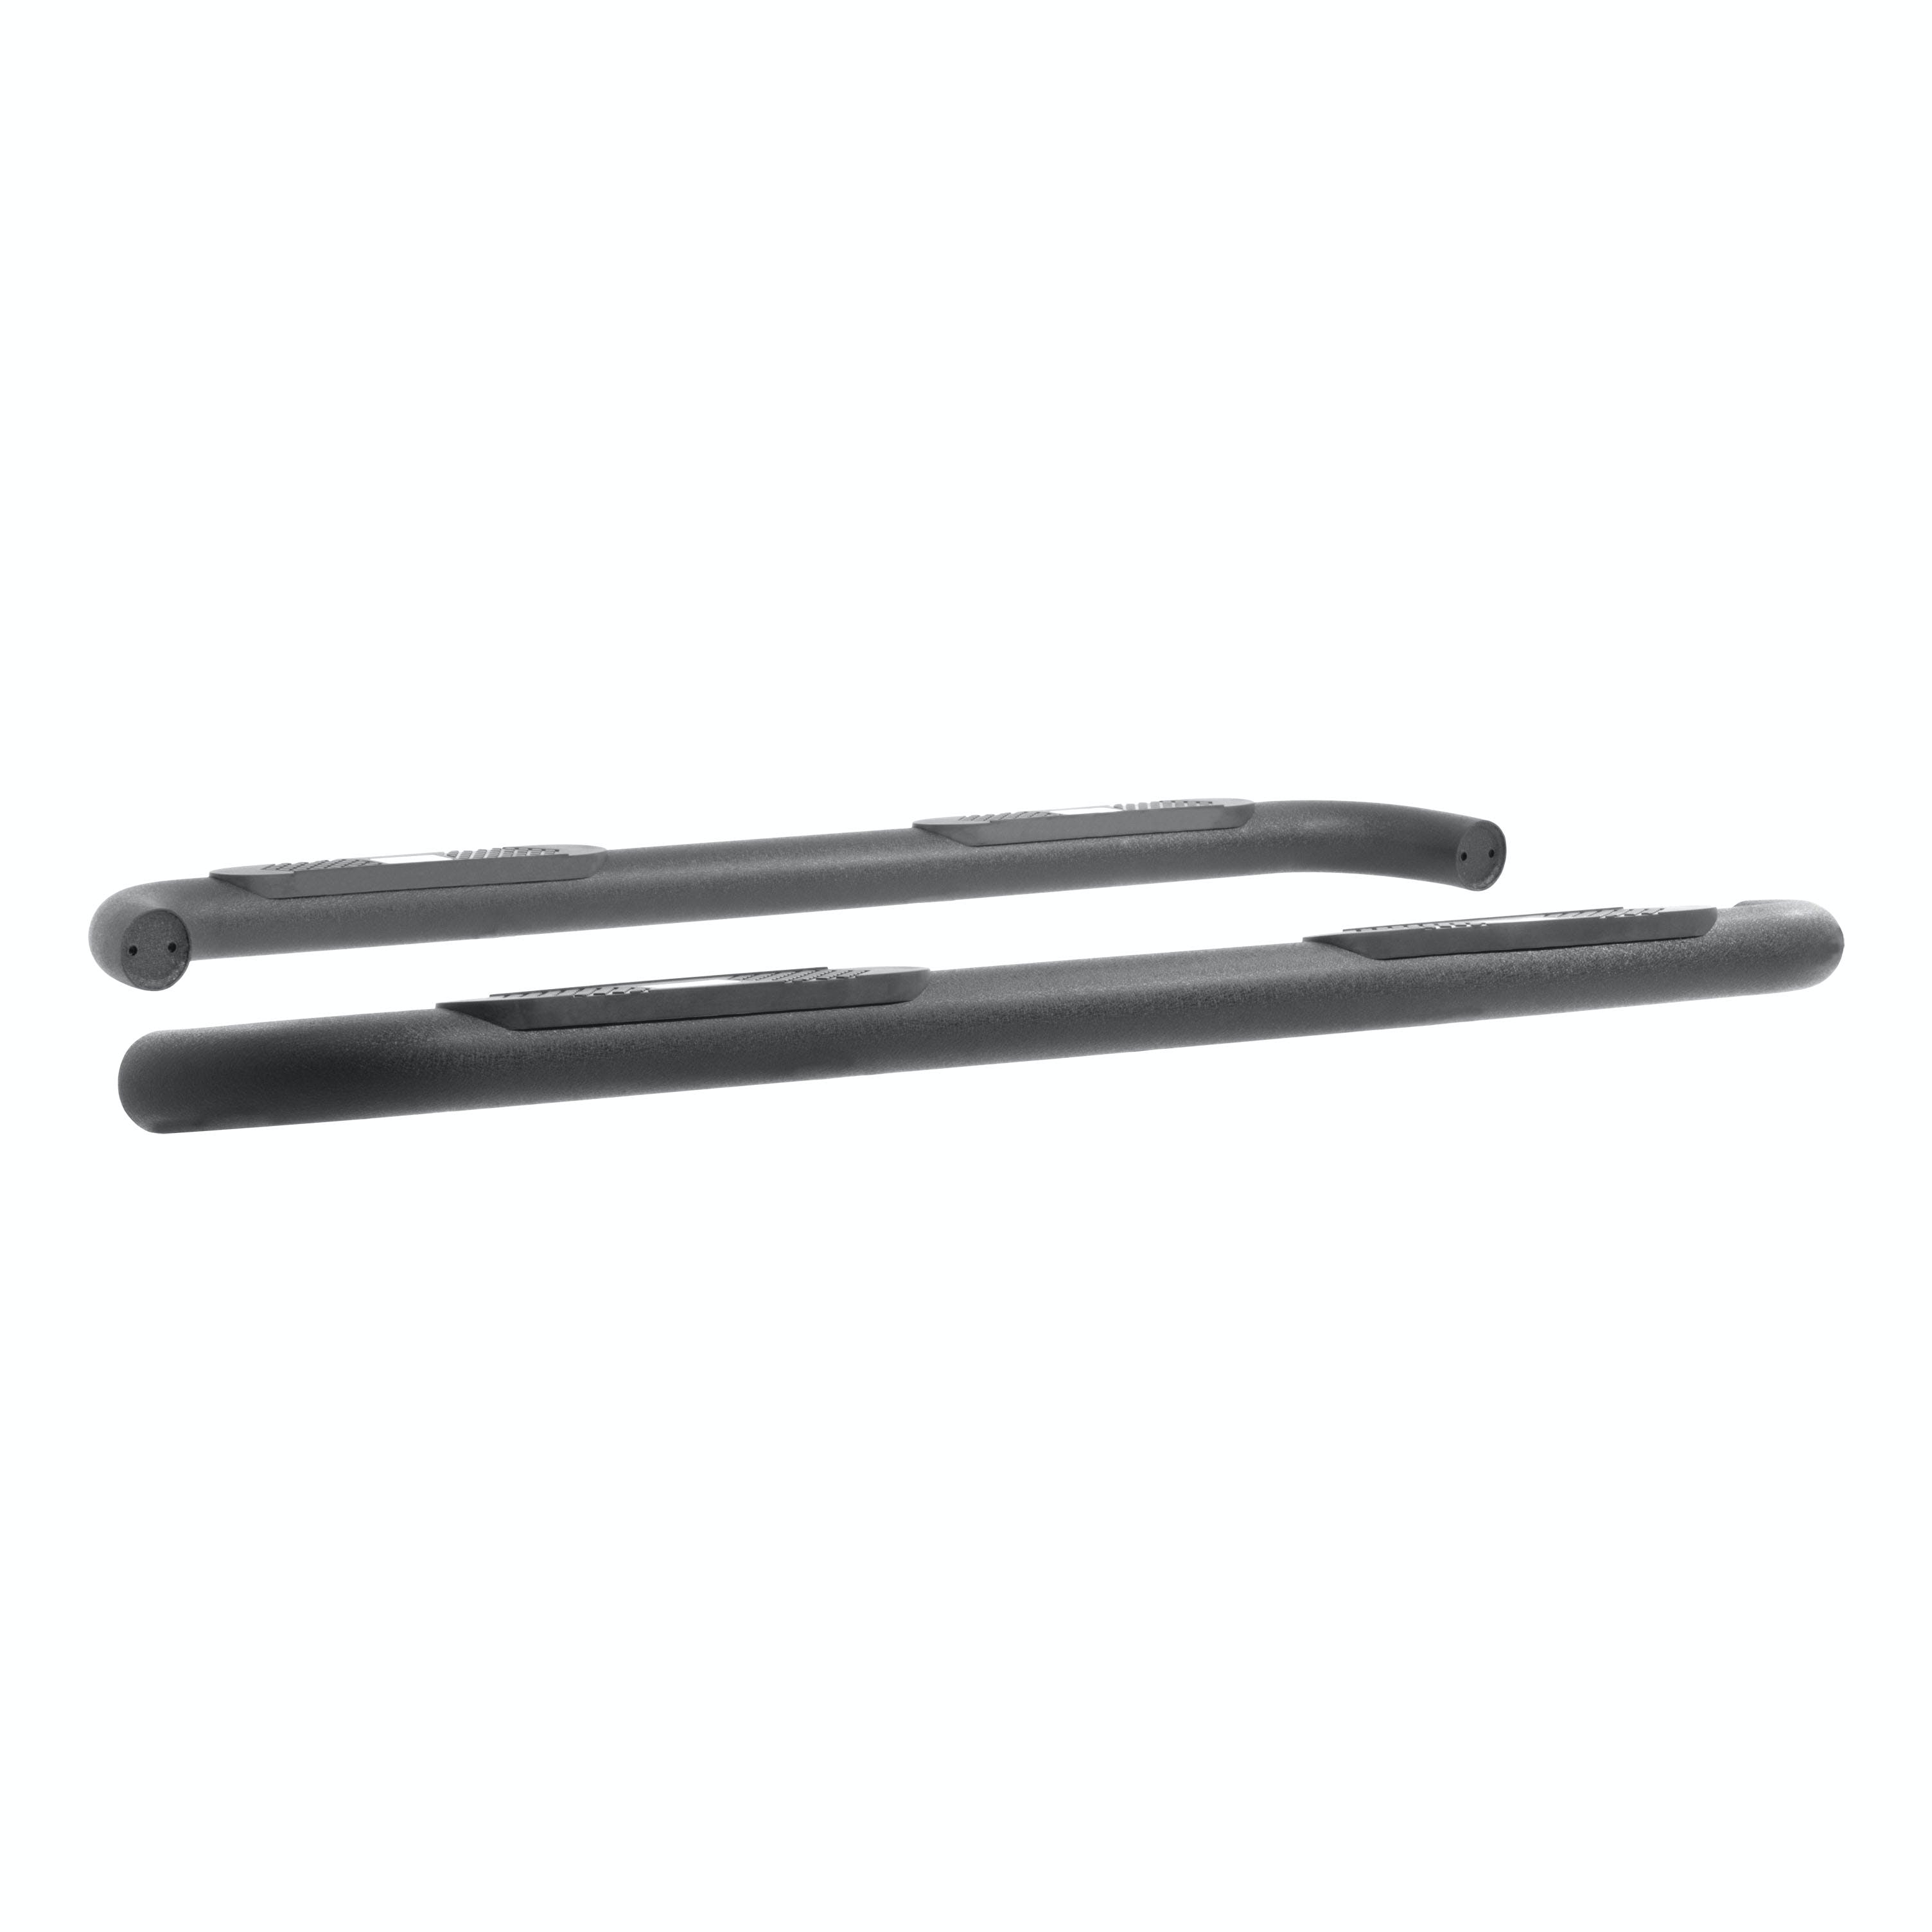 CURT 17537 Replacement TruTrack Weight Distribution Spring Bar for #17501